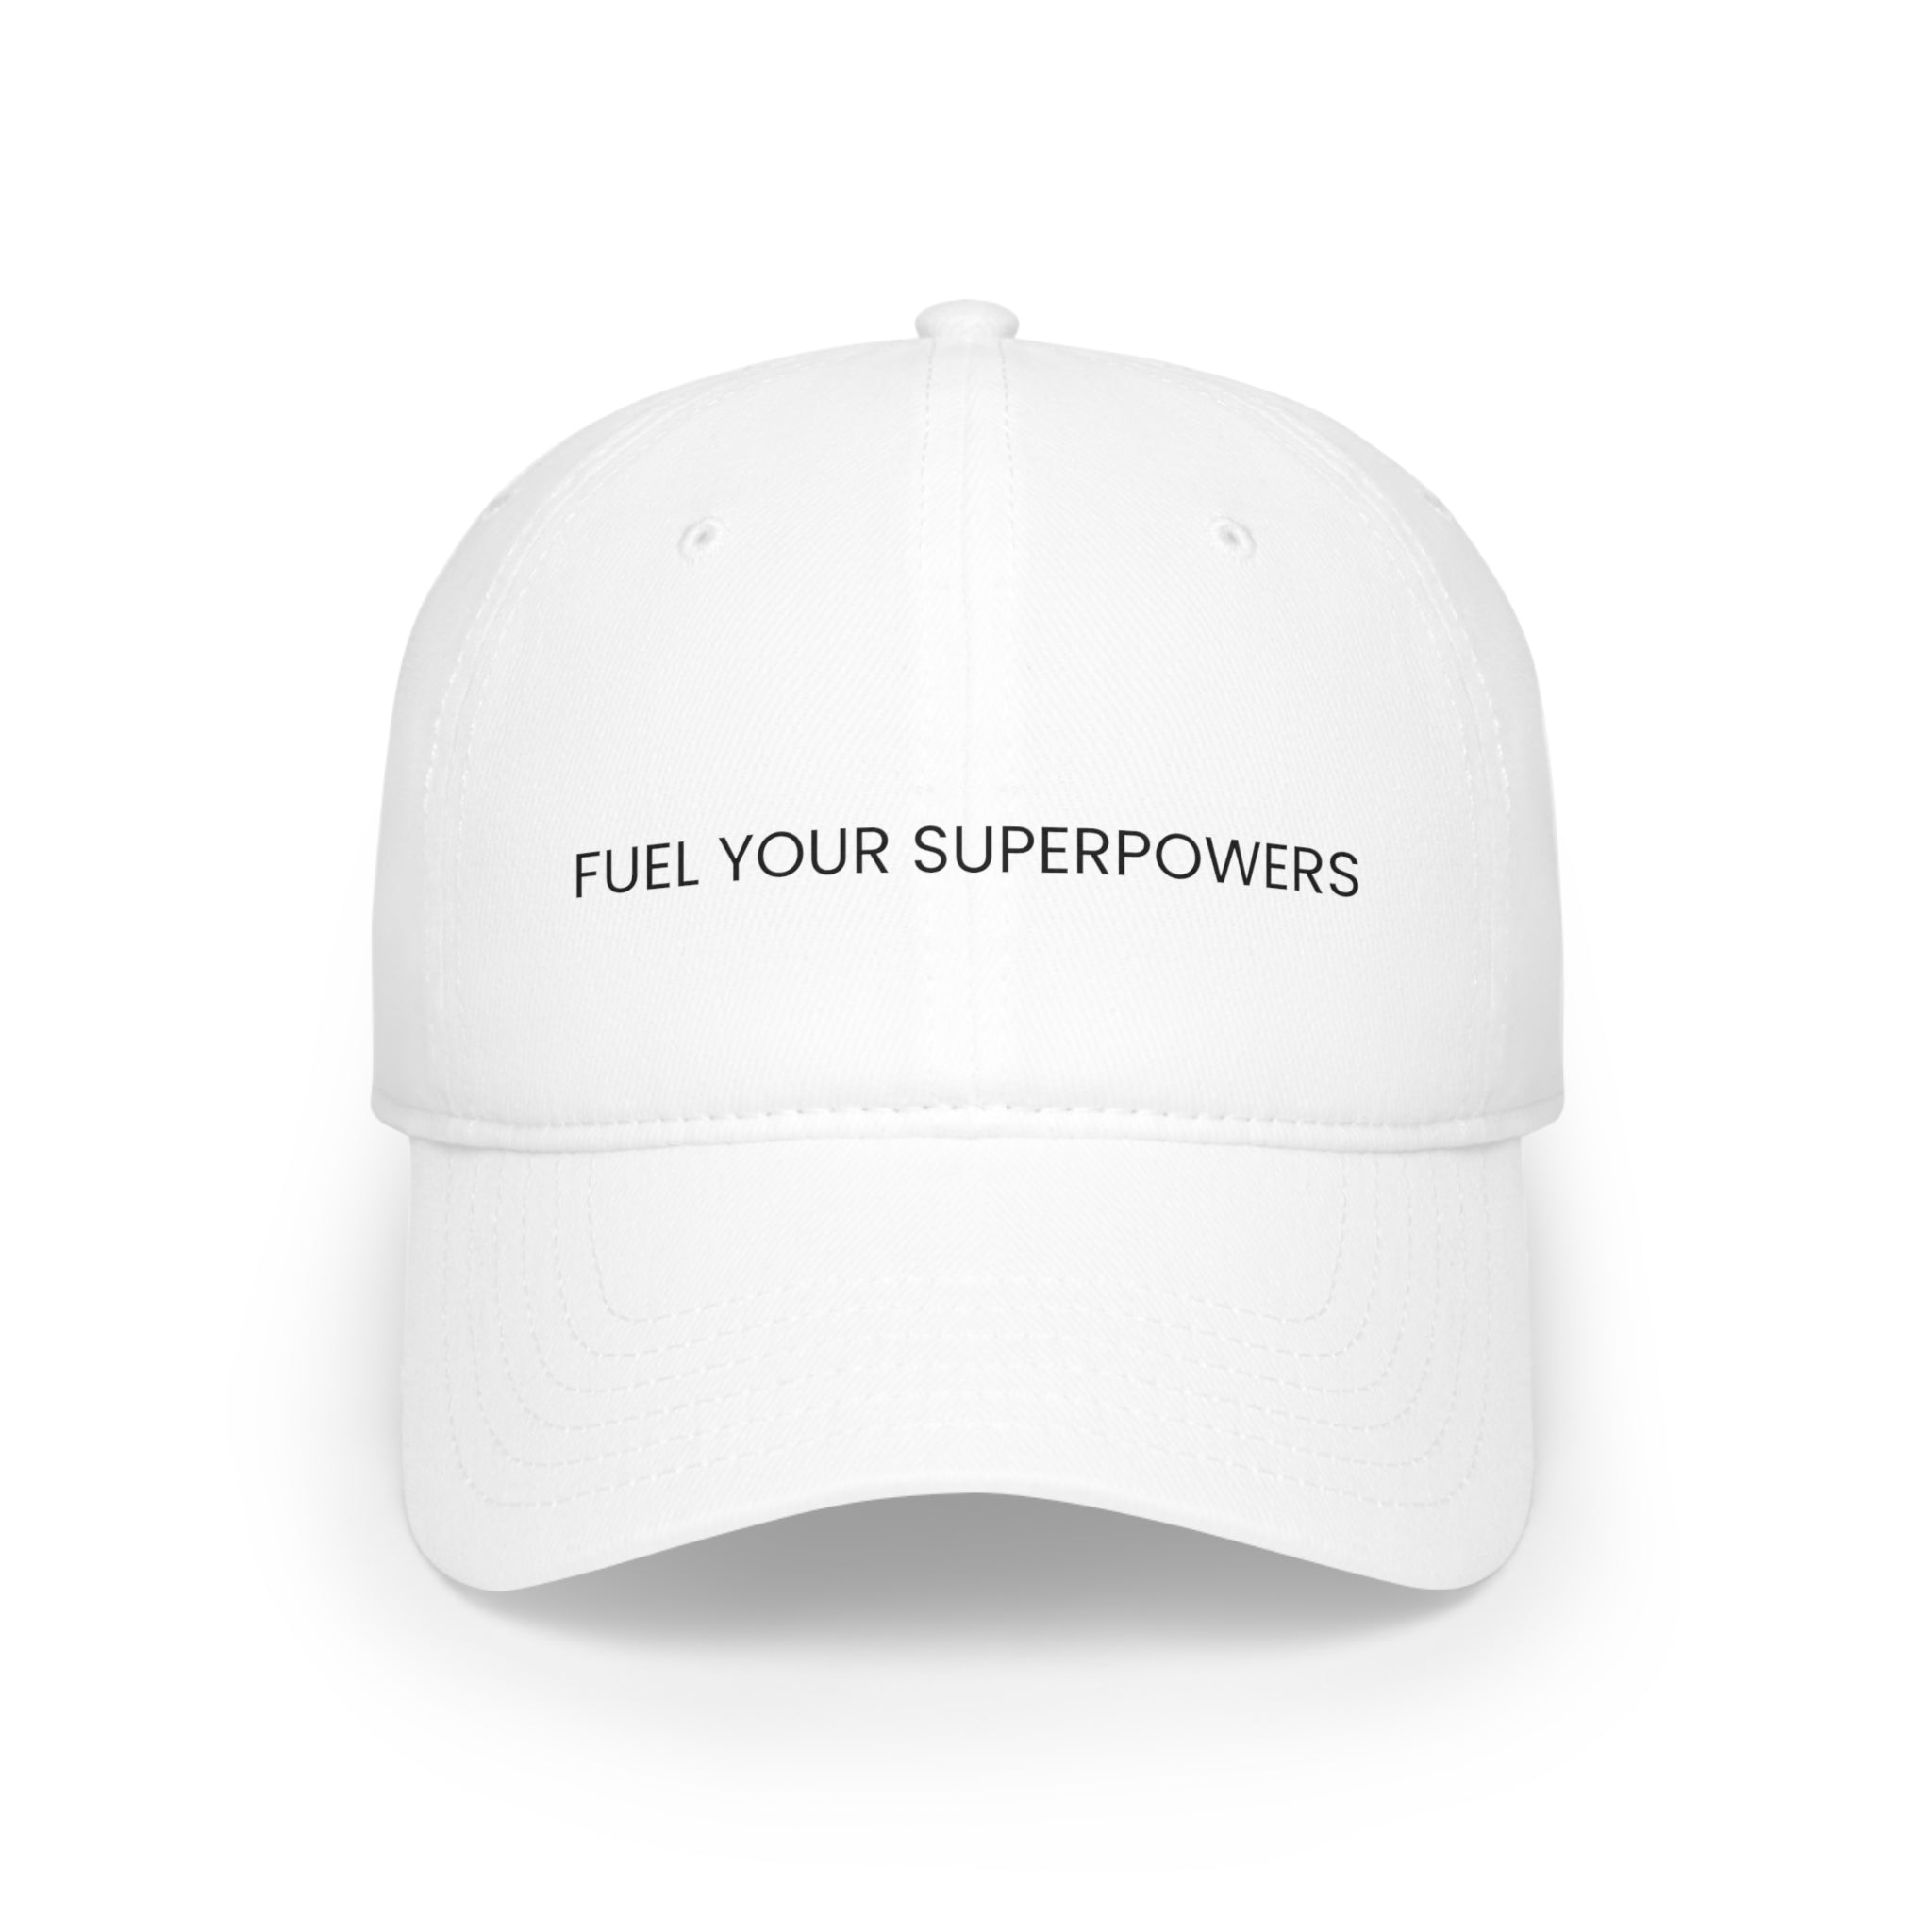 Fuel Your Superpowers Baseball Cap